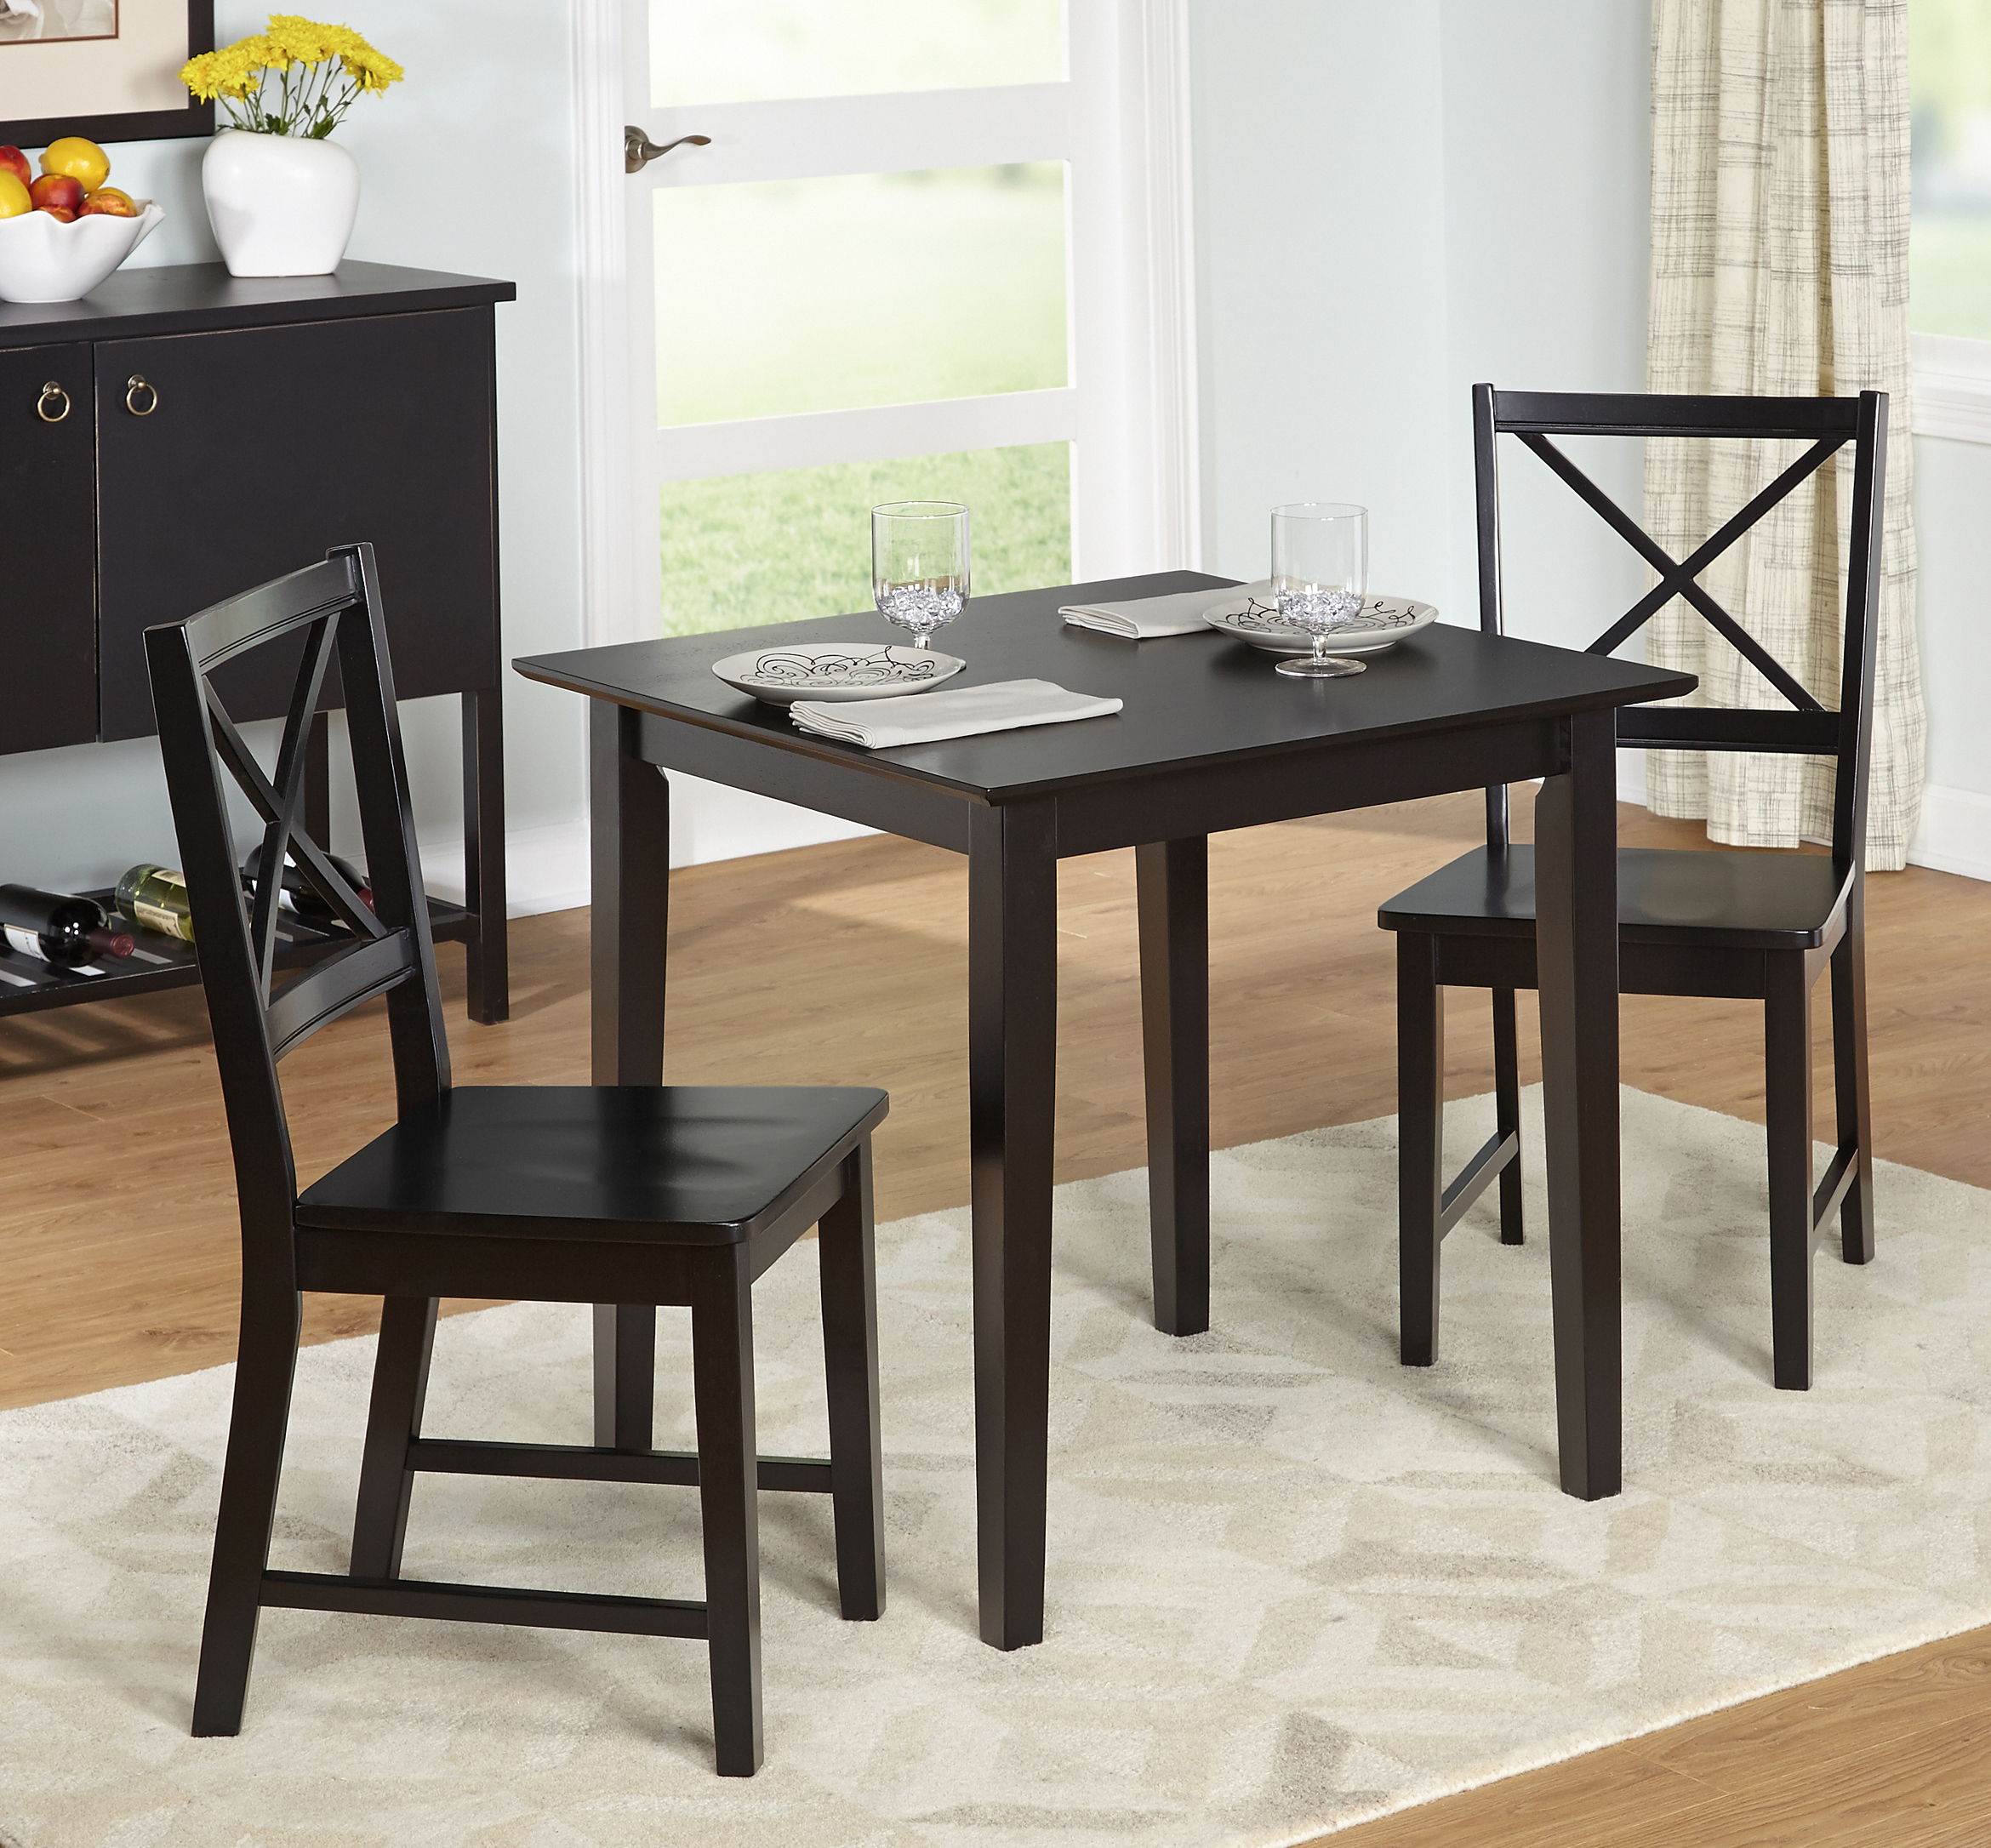 TMS Virginia Cross-Back Chair, Set of 2, Black - image 3 of 5